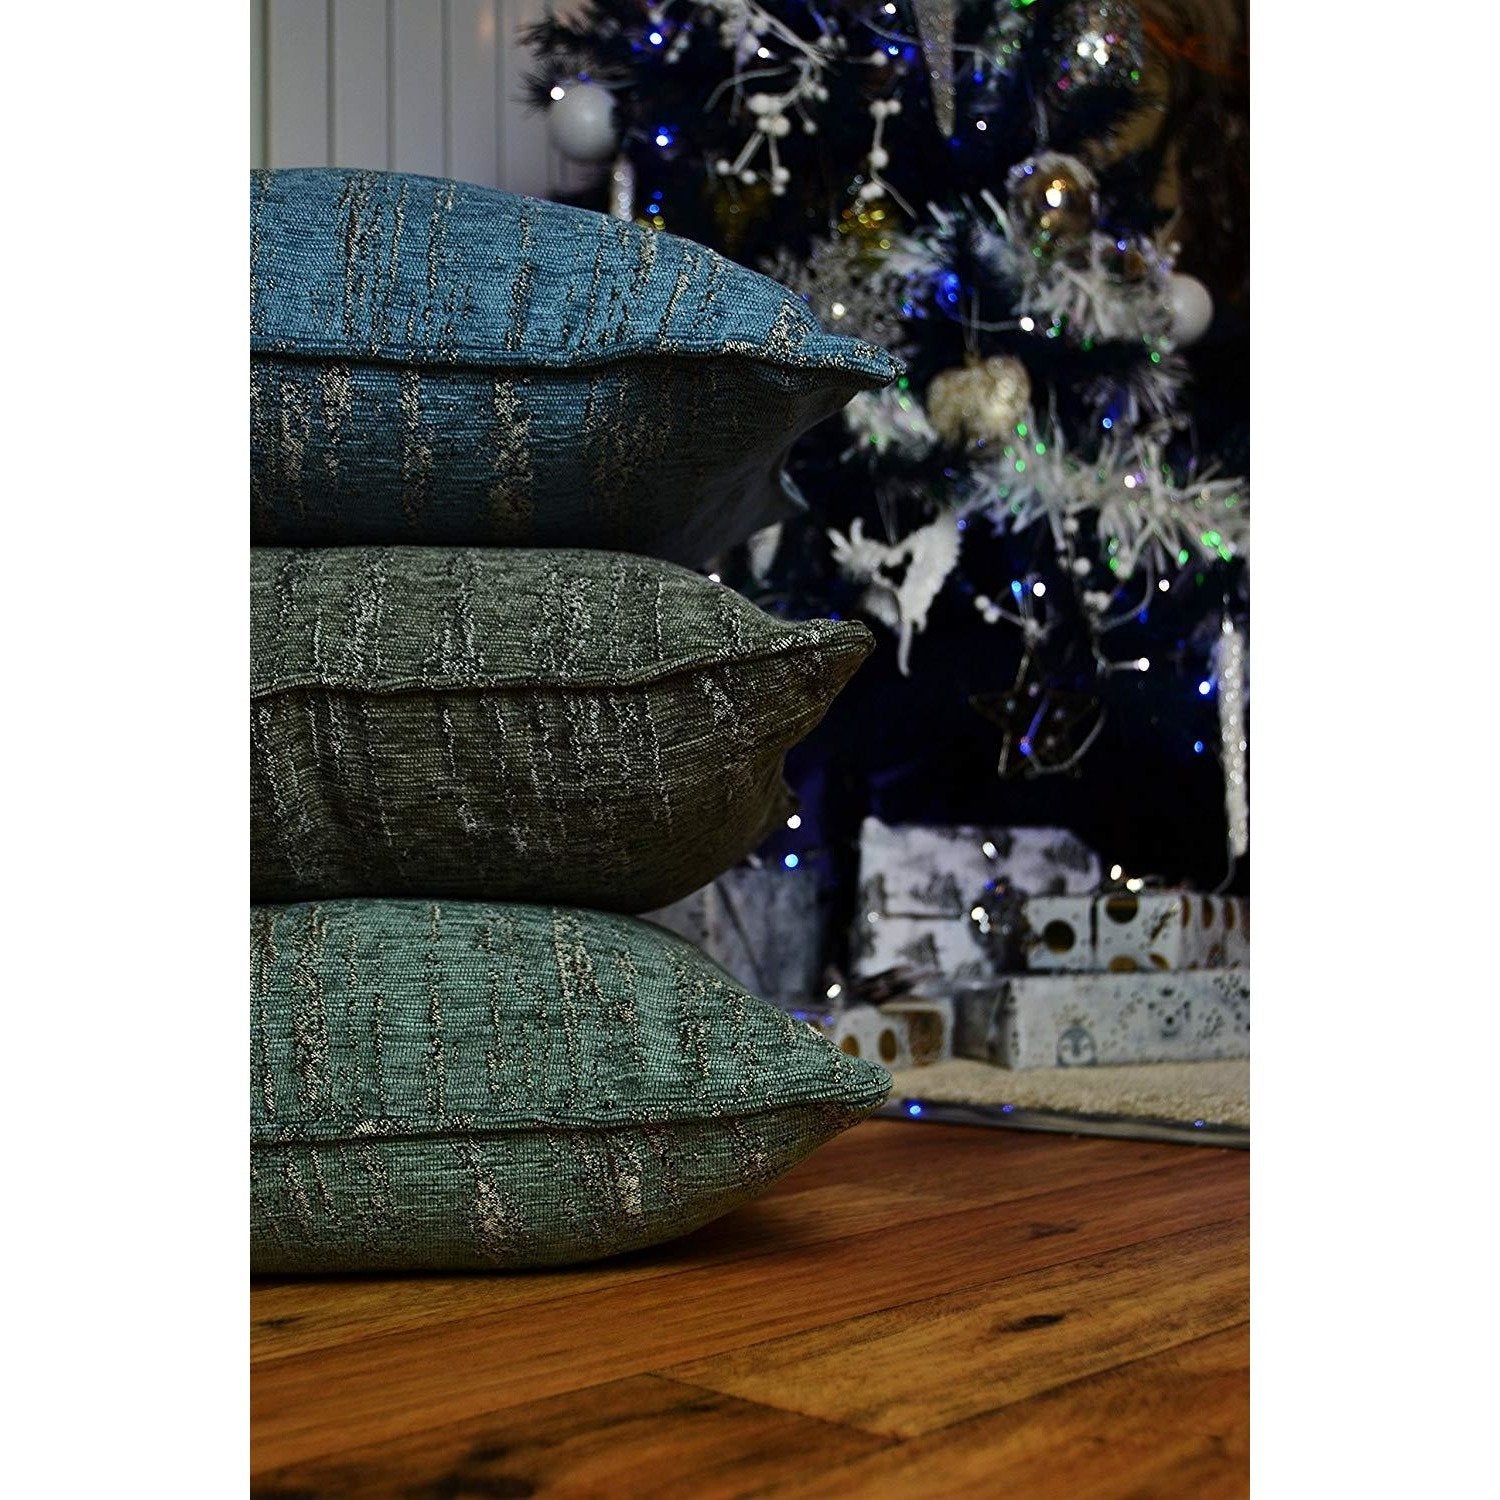 McAlister Textiles Textured Chenille Denim Blue Cushion Cushions and Covers 